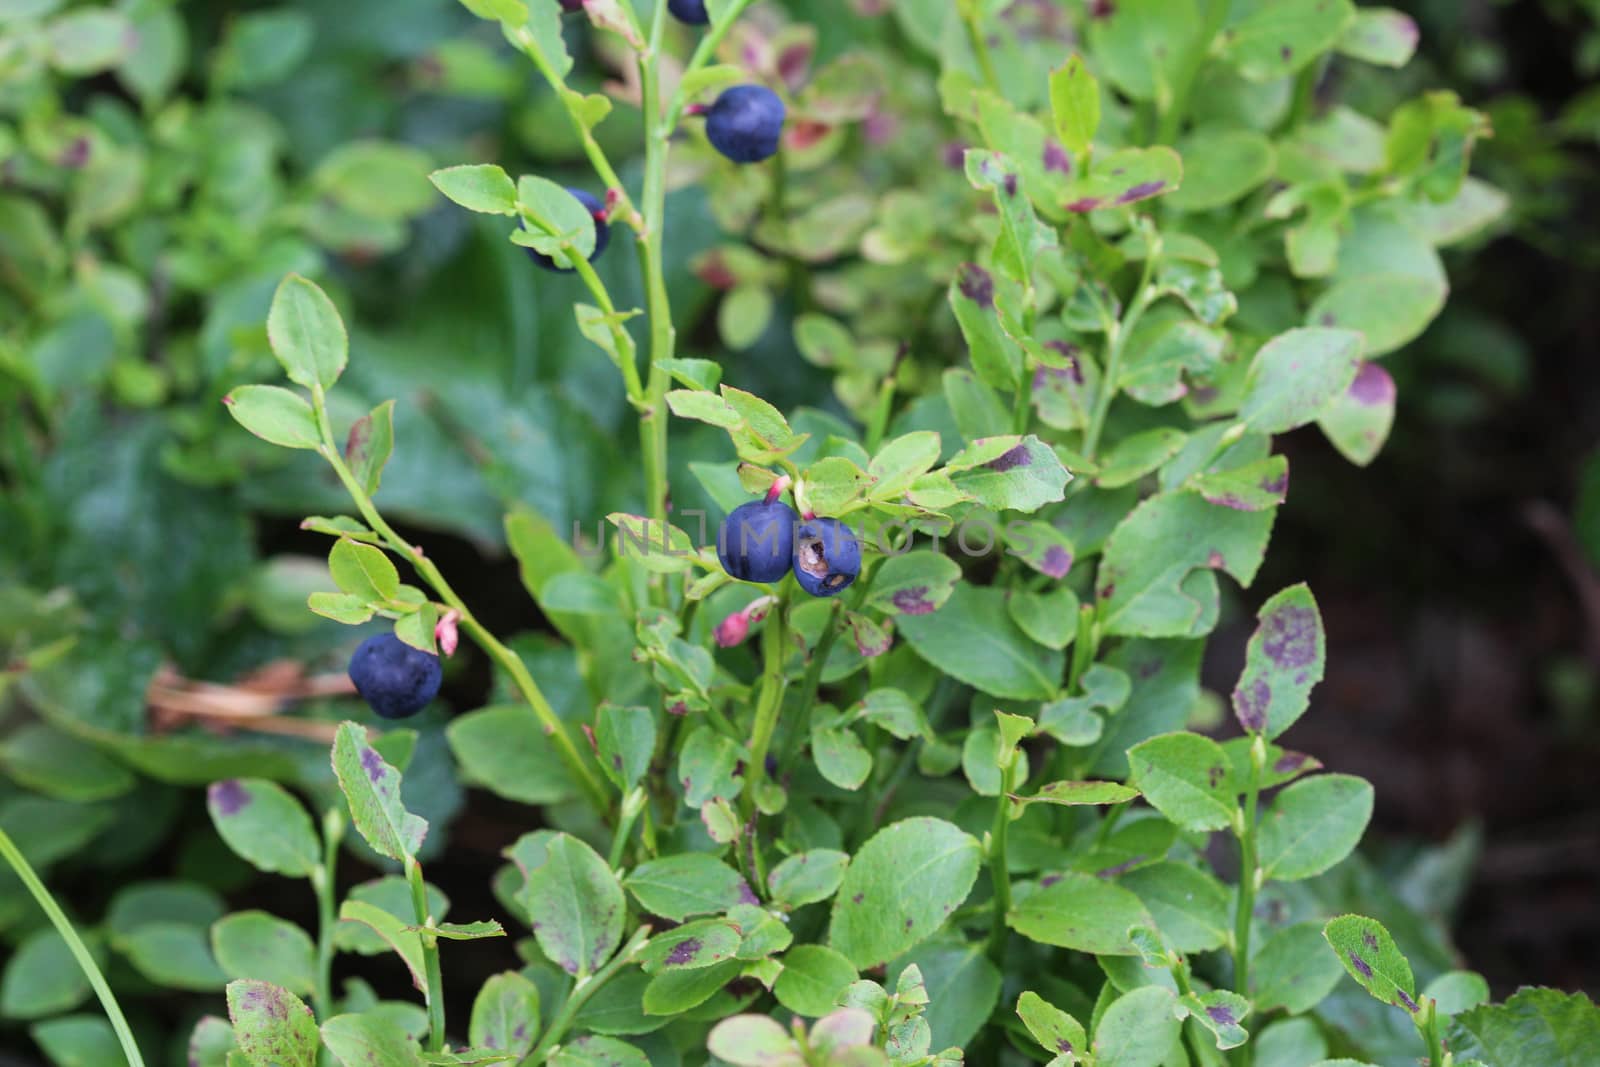 Close up of Vaccinium myrtillus shrub, common called commonly called common bilberry, wimberry, blue whortleberry, or European blueberry.